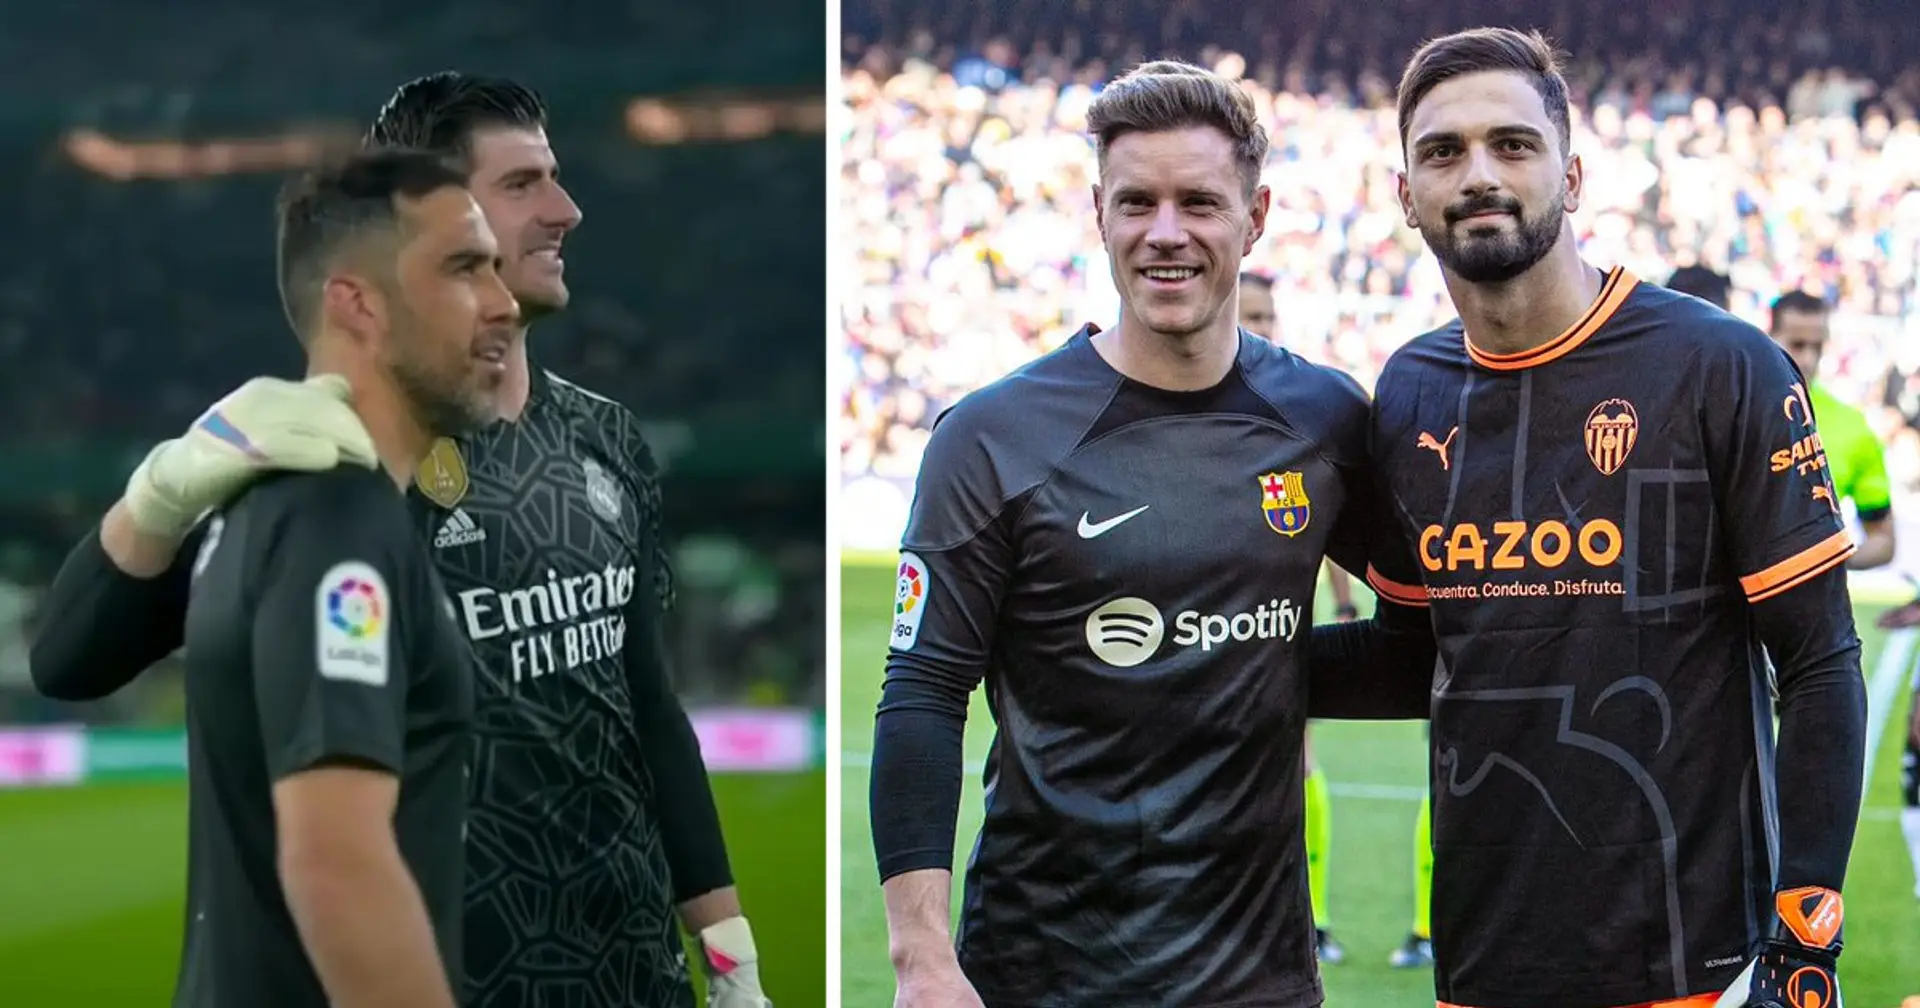 Explained: why did Ter Stegen and other La Liga goalkeepers wear black jerseys this weekend